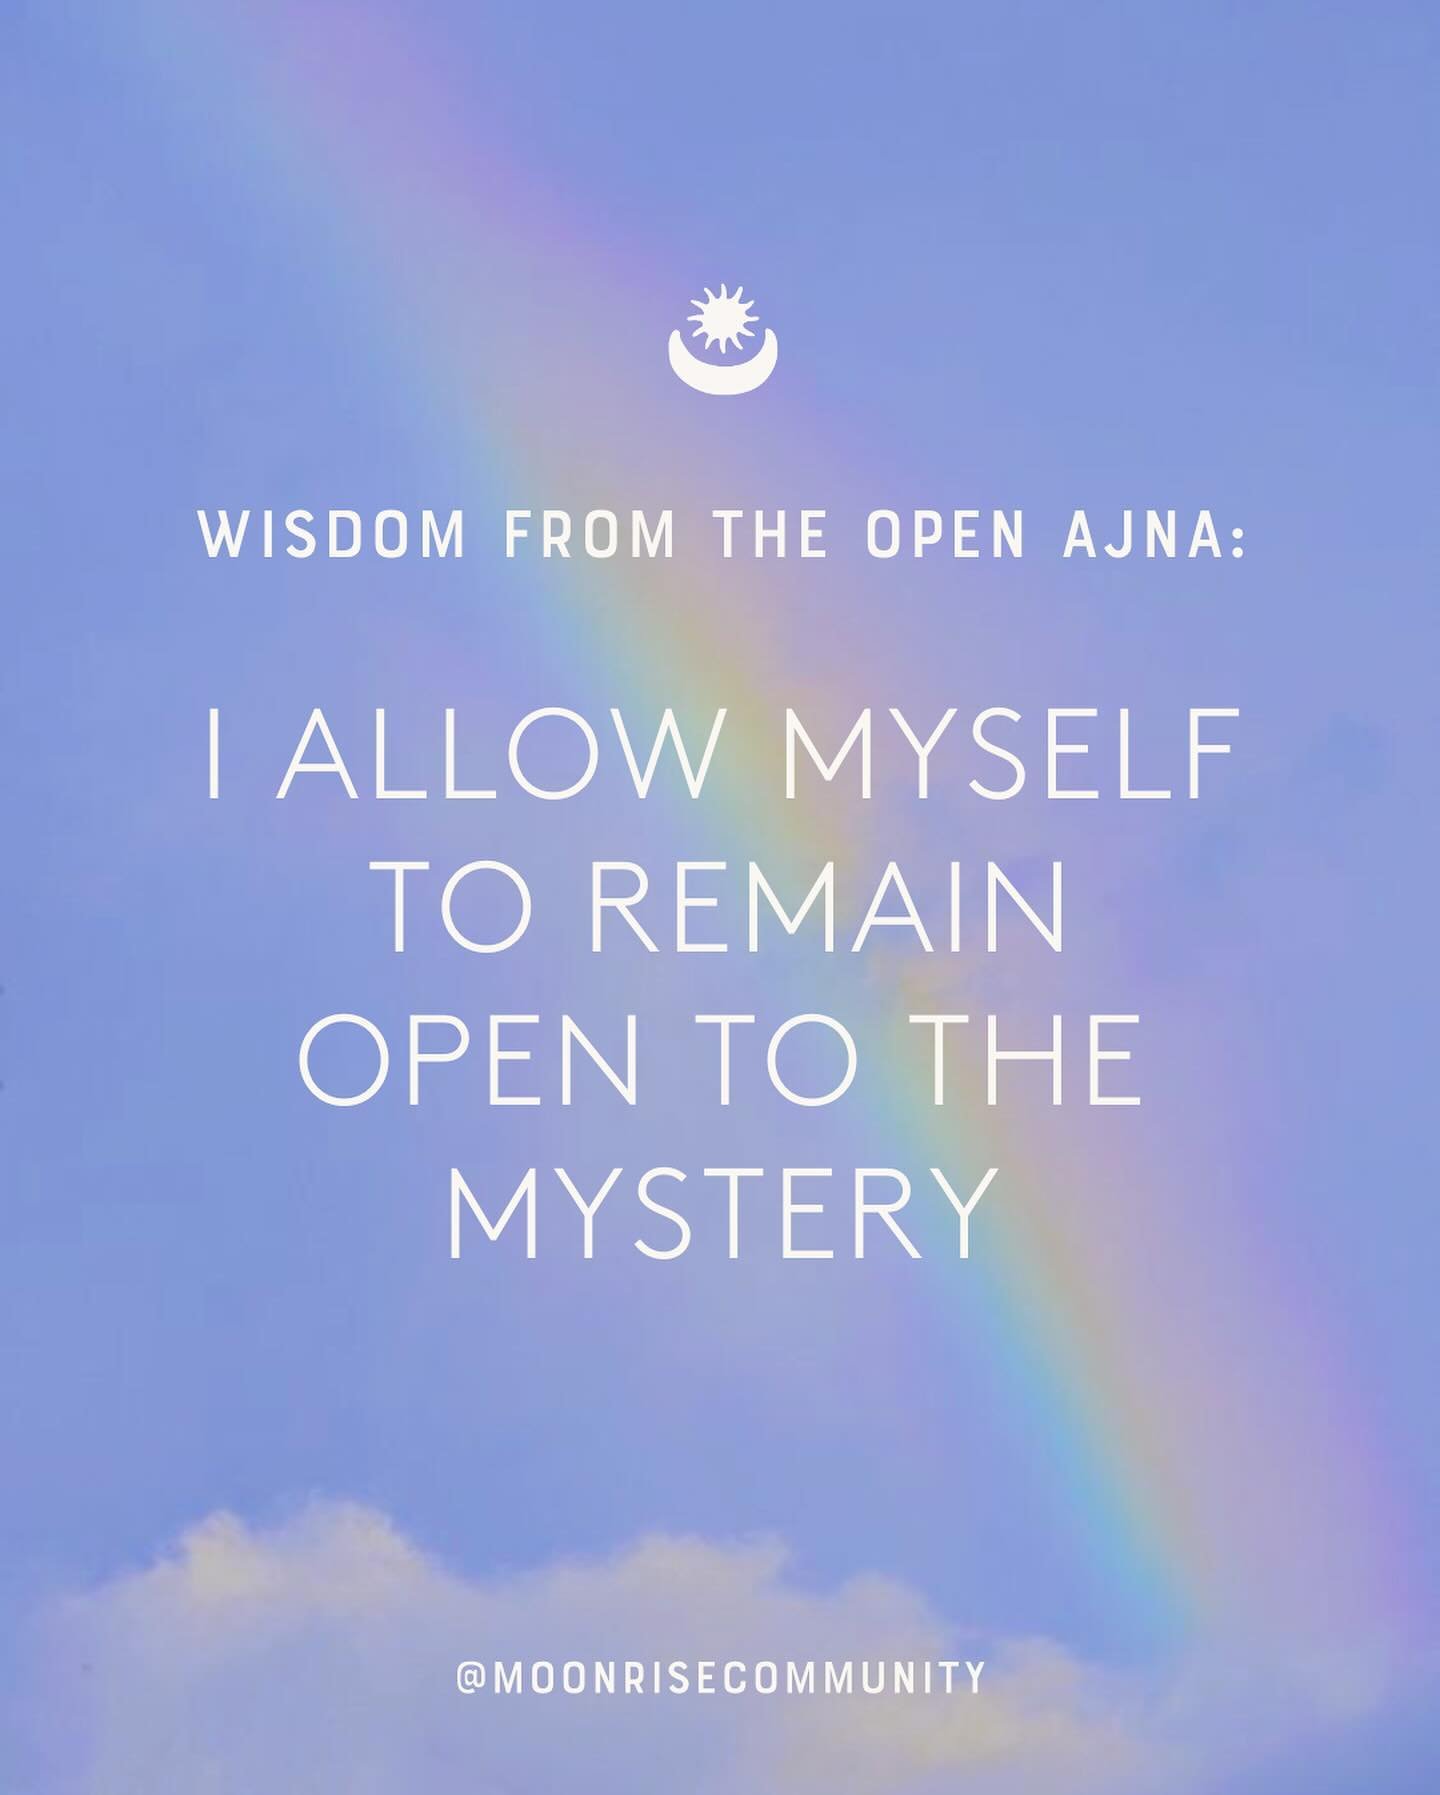 Wisdom from the open or undefined Ajna.

Human Design shows us exactly where we take on energy from the world around us. We can see this in the white or undefined shapes or centers in our chart. 

Each undefined center contains an incredible array of